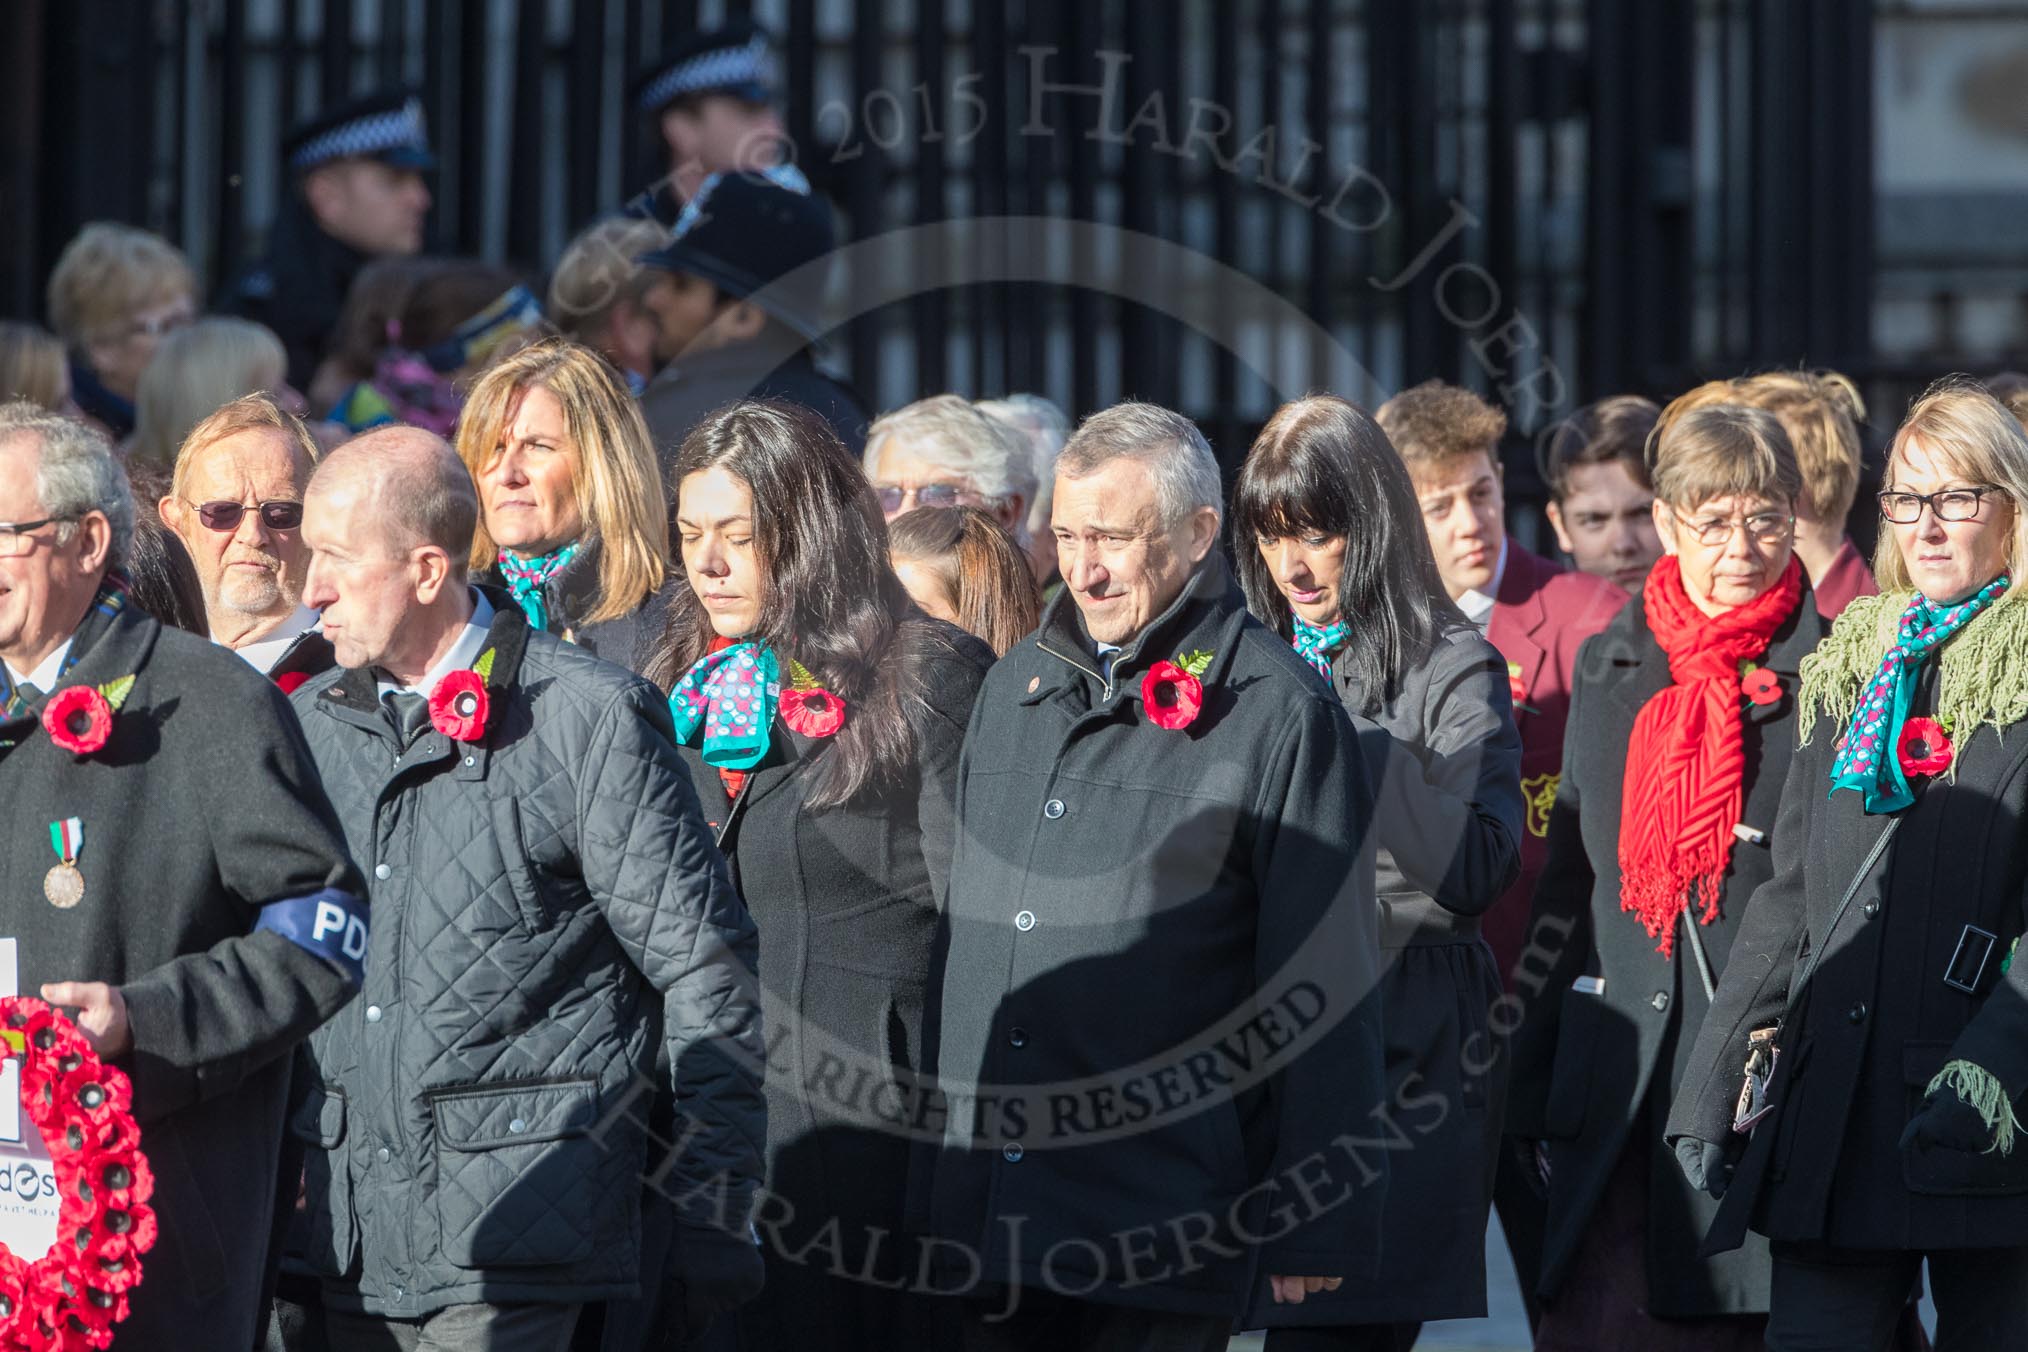 March Past, Remembrance Sunday at the Cenotaph 2016: M19 PDSA.
Cenotaph, Whitehall, London SW1,
London,
Greater London,
United Kingdom,
on 13 November 2016 at 13:16, image #2646